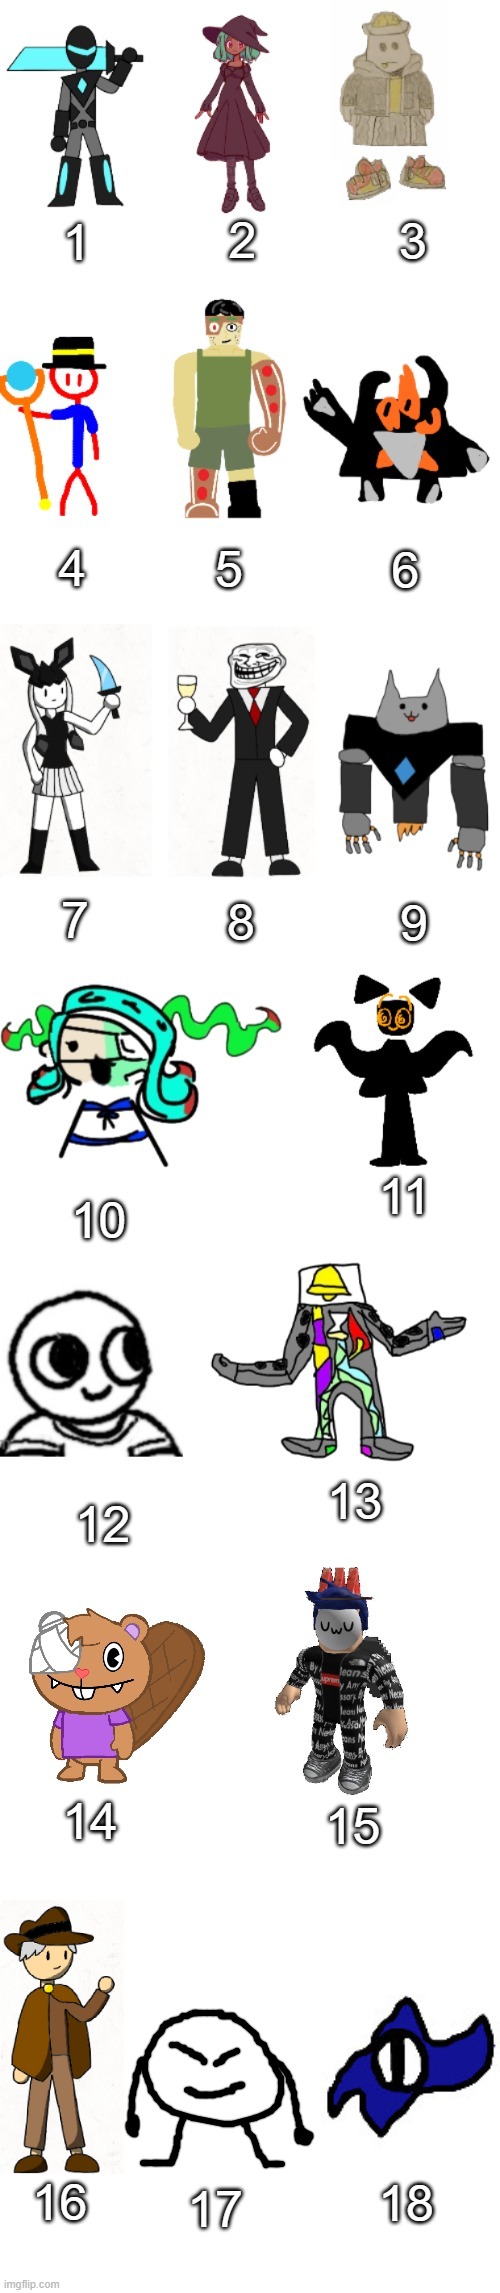 LAST ONE!!! Added The Traveler, John Cipher, and I tried my best to draw Bob | 2; 1; 3; 4; 5; 6; 7; 8; 9; 11; 10; 13; 12; 15; 14; 16; 18; 17 | image tagged in the most basic imgflip-bossfights oc list everrrrr | made w/ Imgflip meme maker